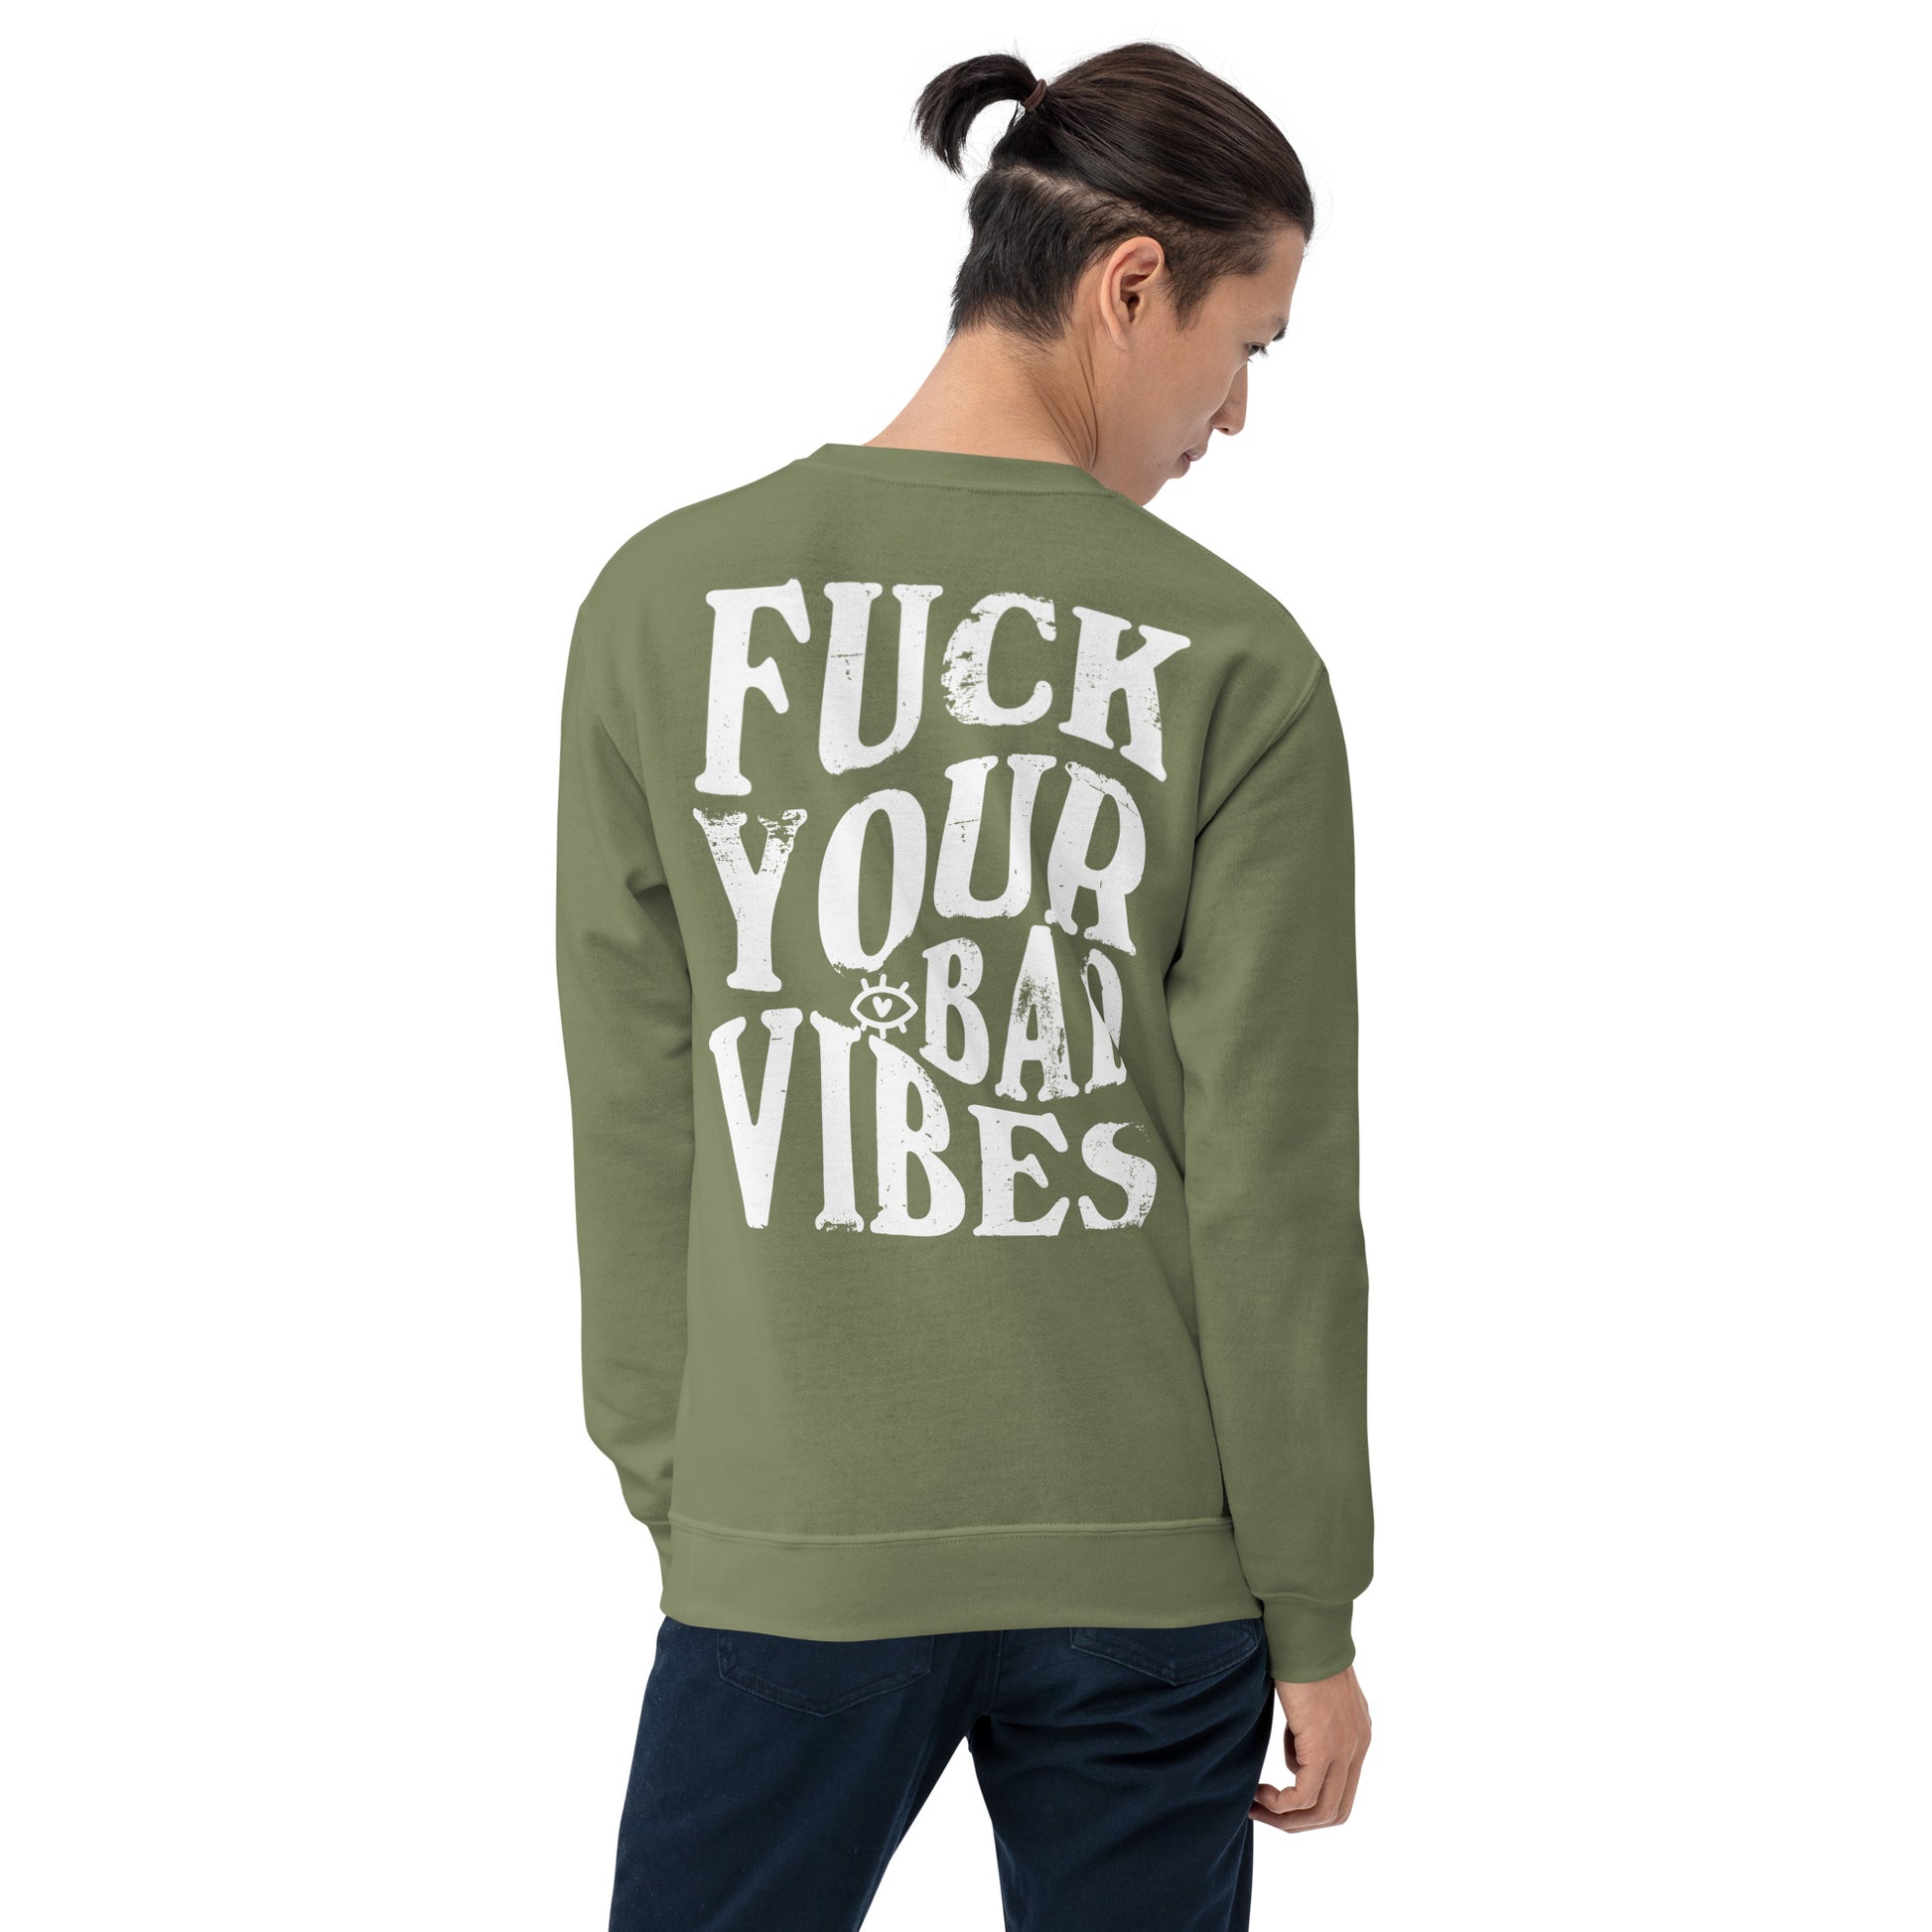 Fuck Your Bad Vibes Embroidered Sweatshirt Military Green